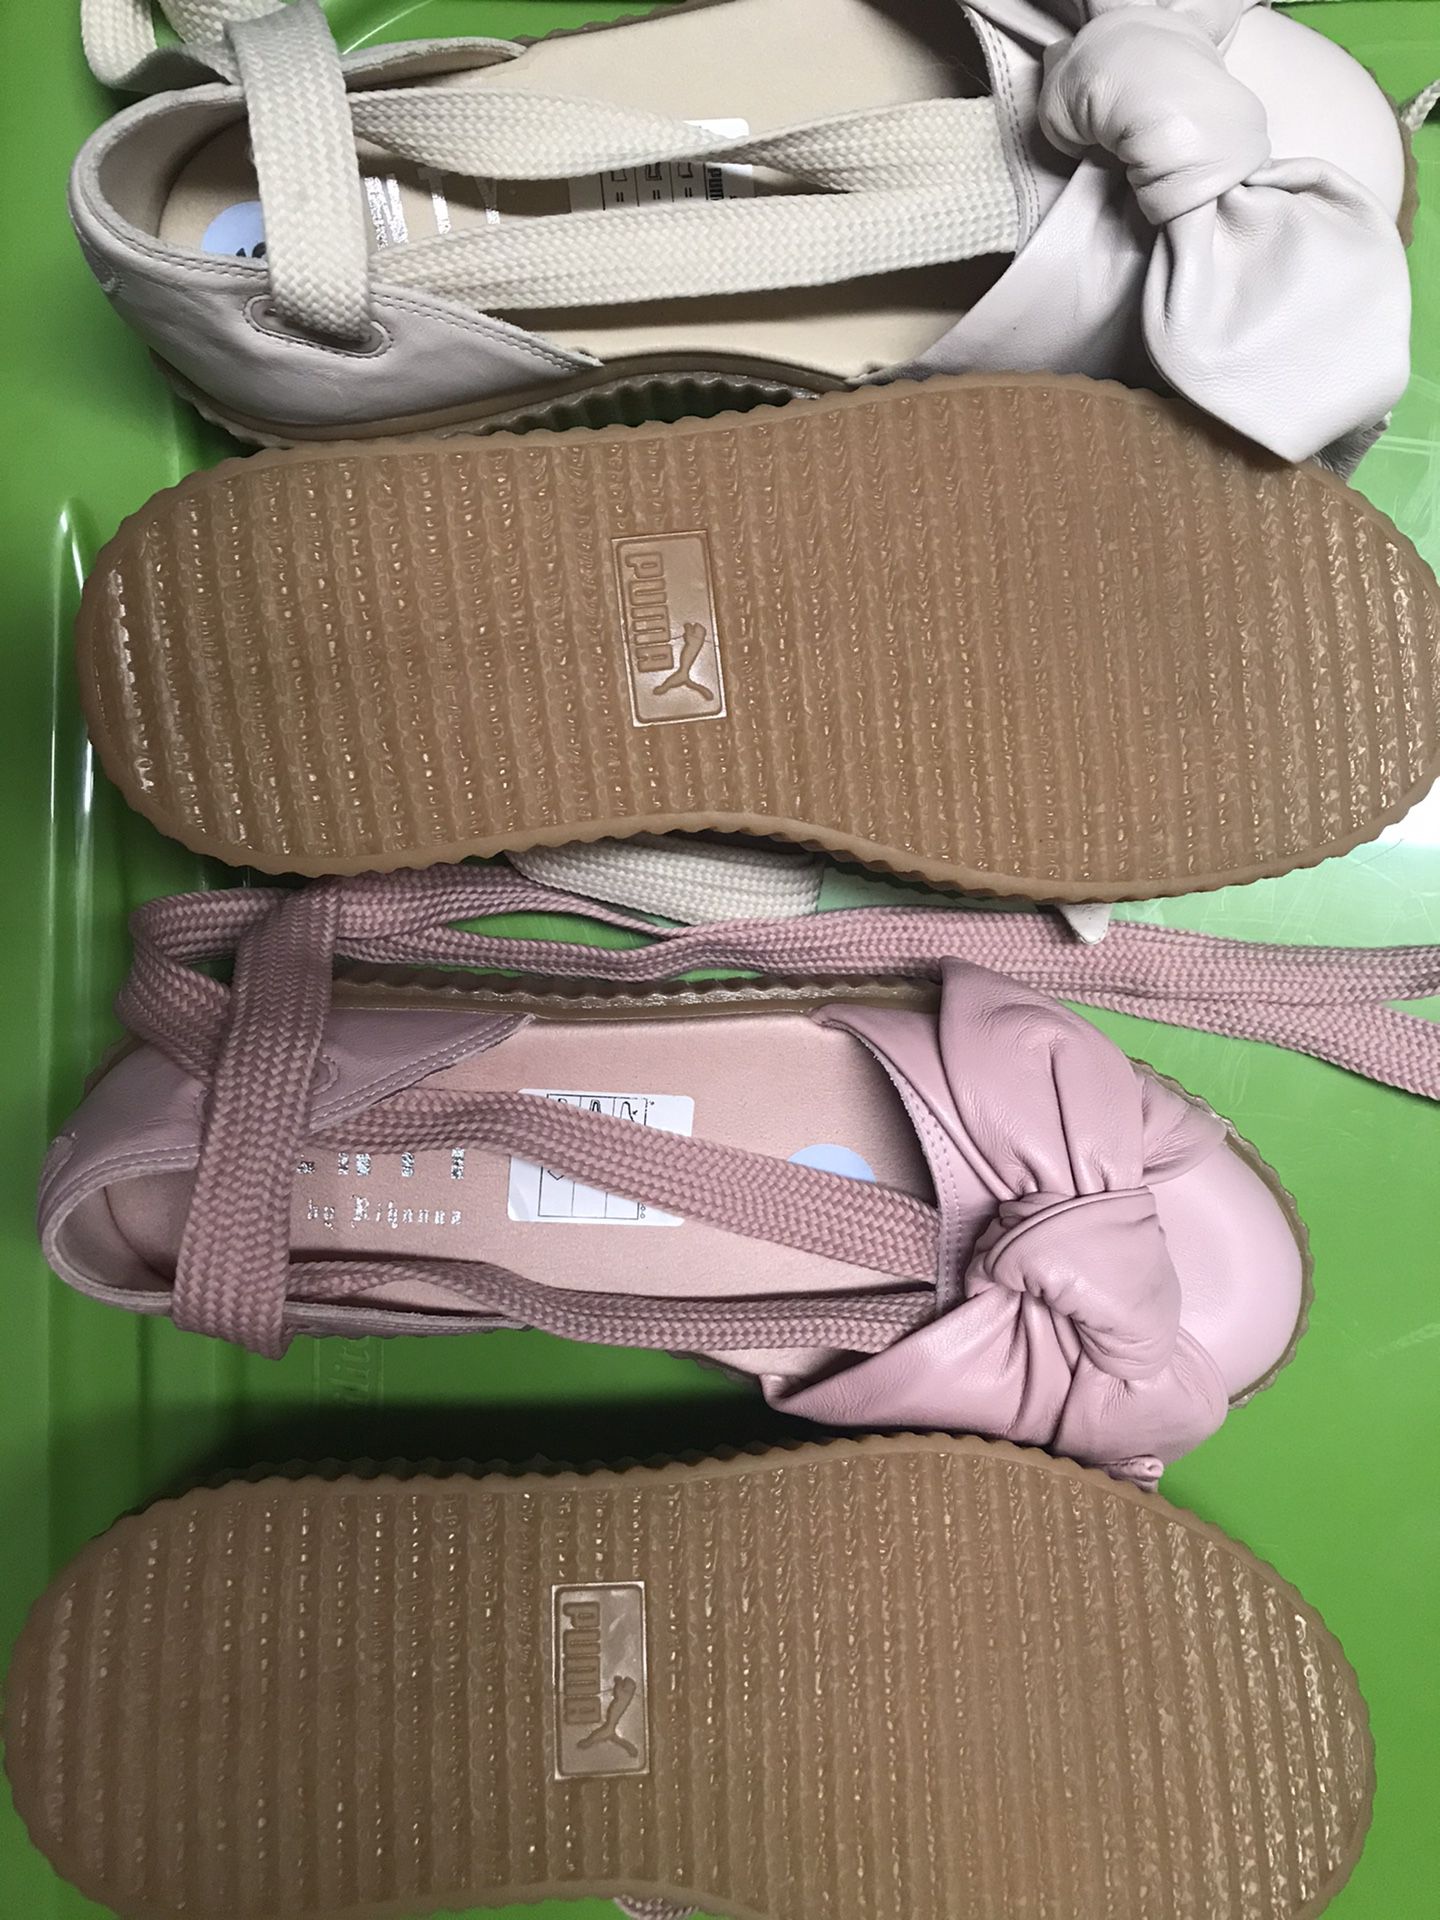 Women’s Puma Fenty leather shoes size 9 new. 2 pairs $40